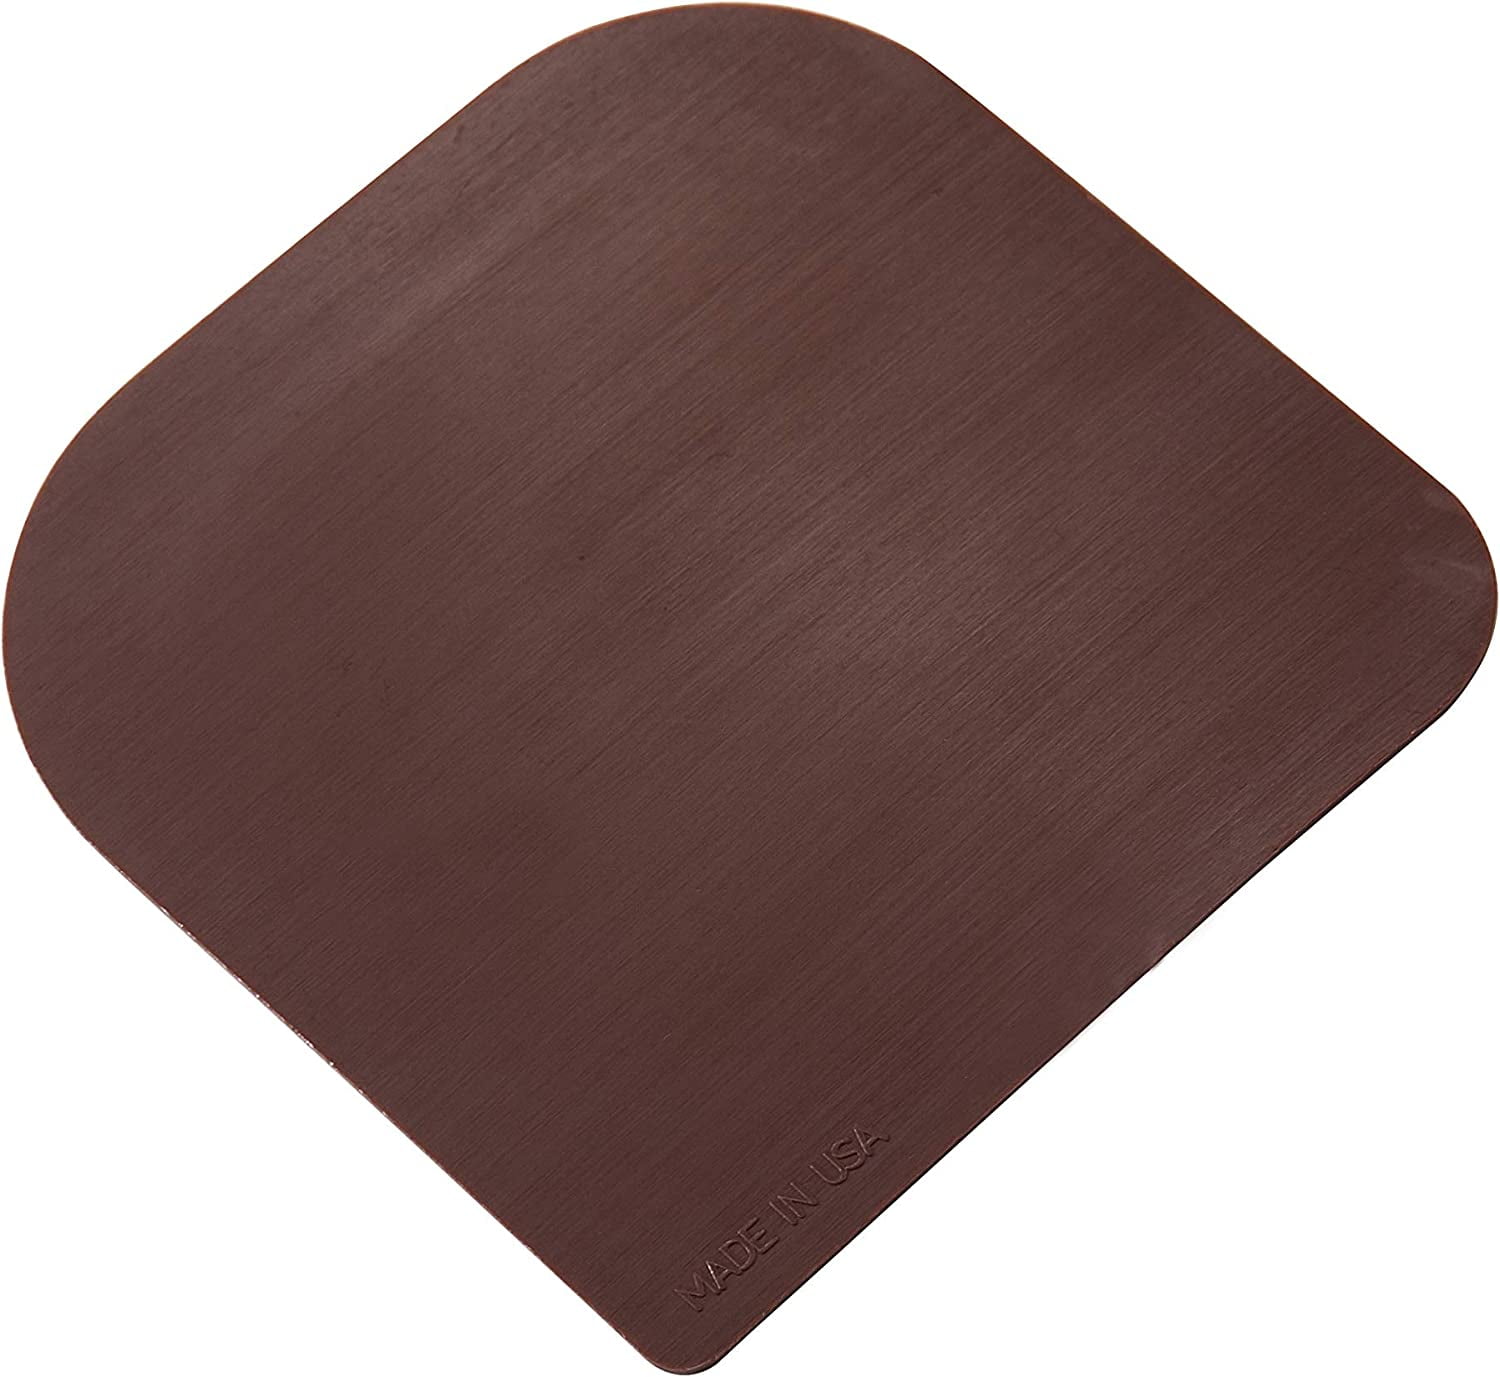 pampered chef nylon pan scrapers set of 3 in brown 